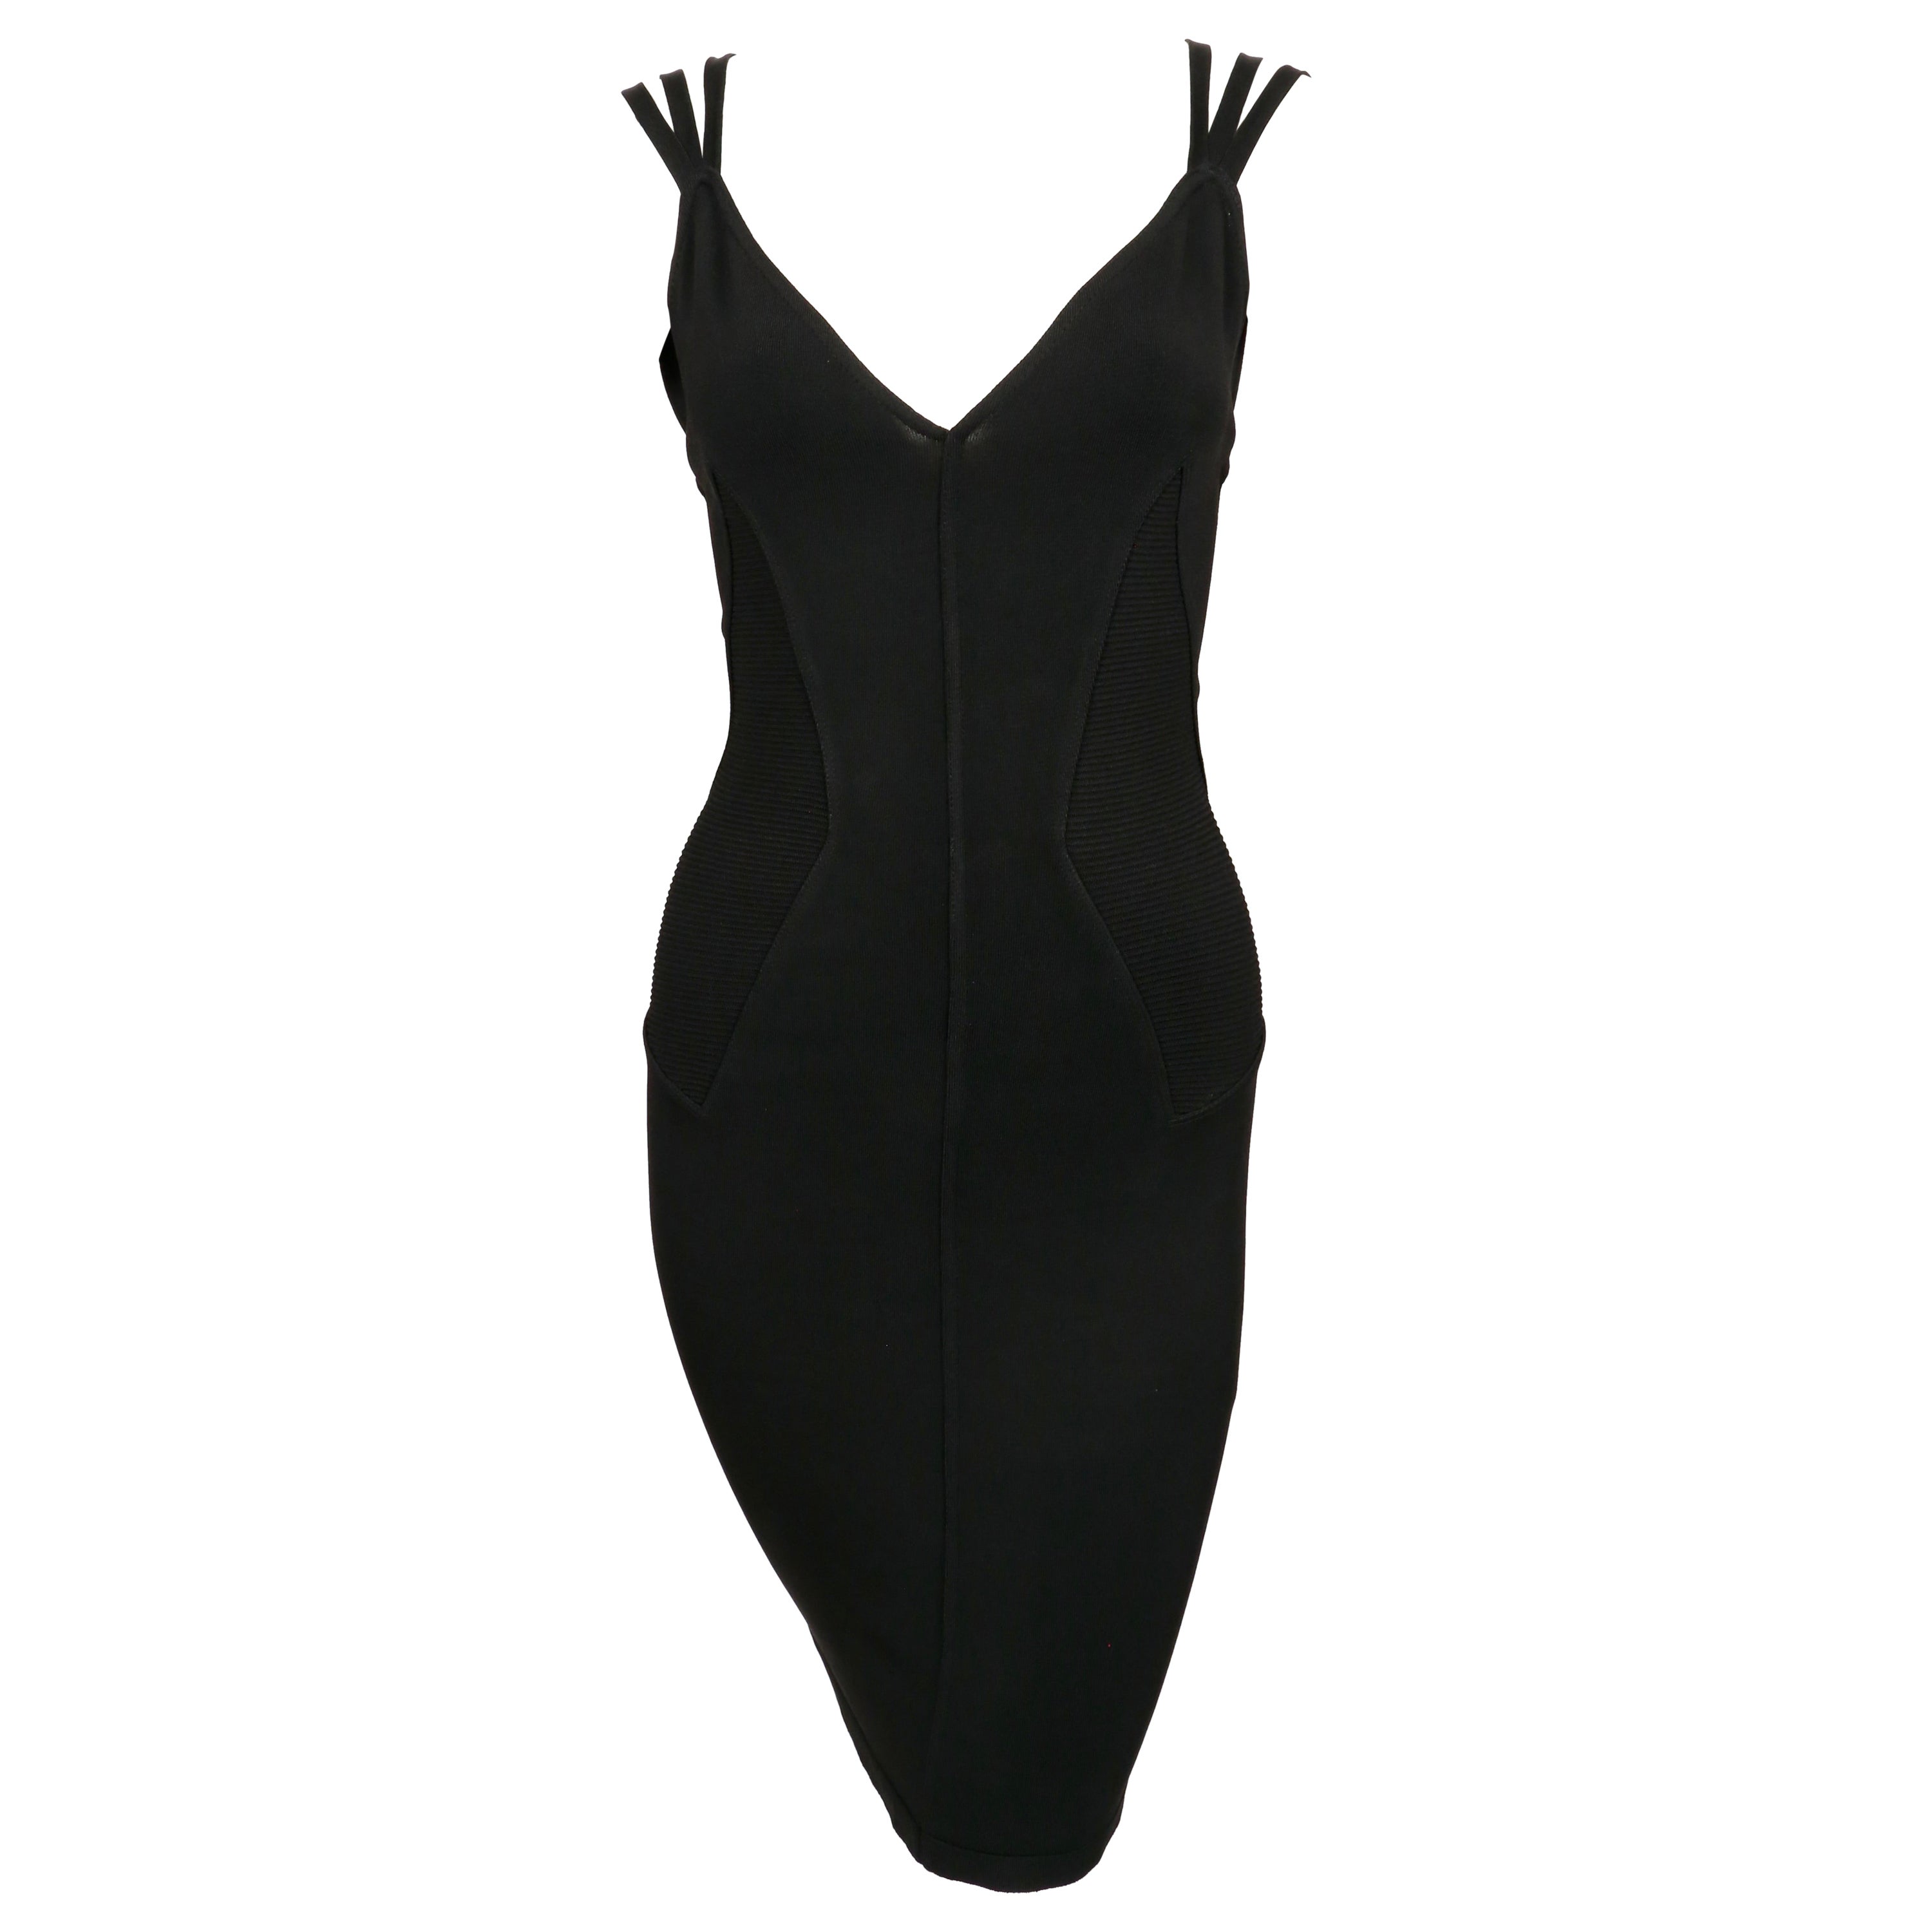 1990 AZZEDINE ALAIA black runway dress with strappy back For Sale